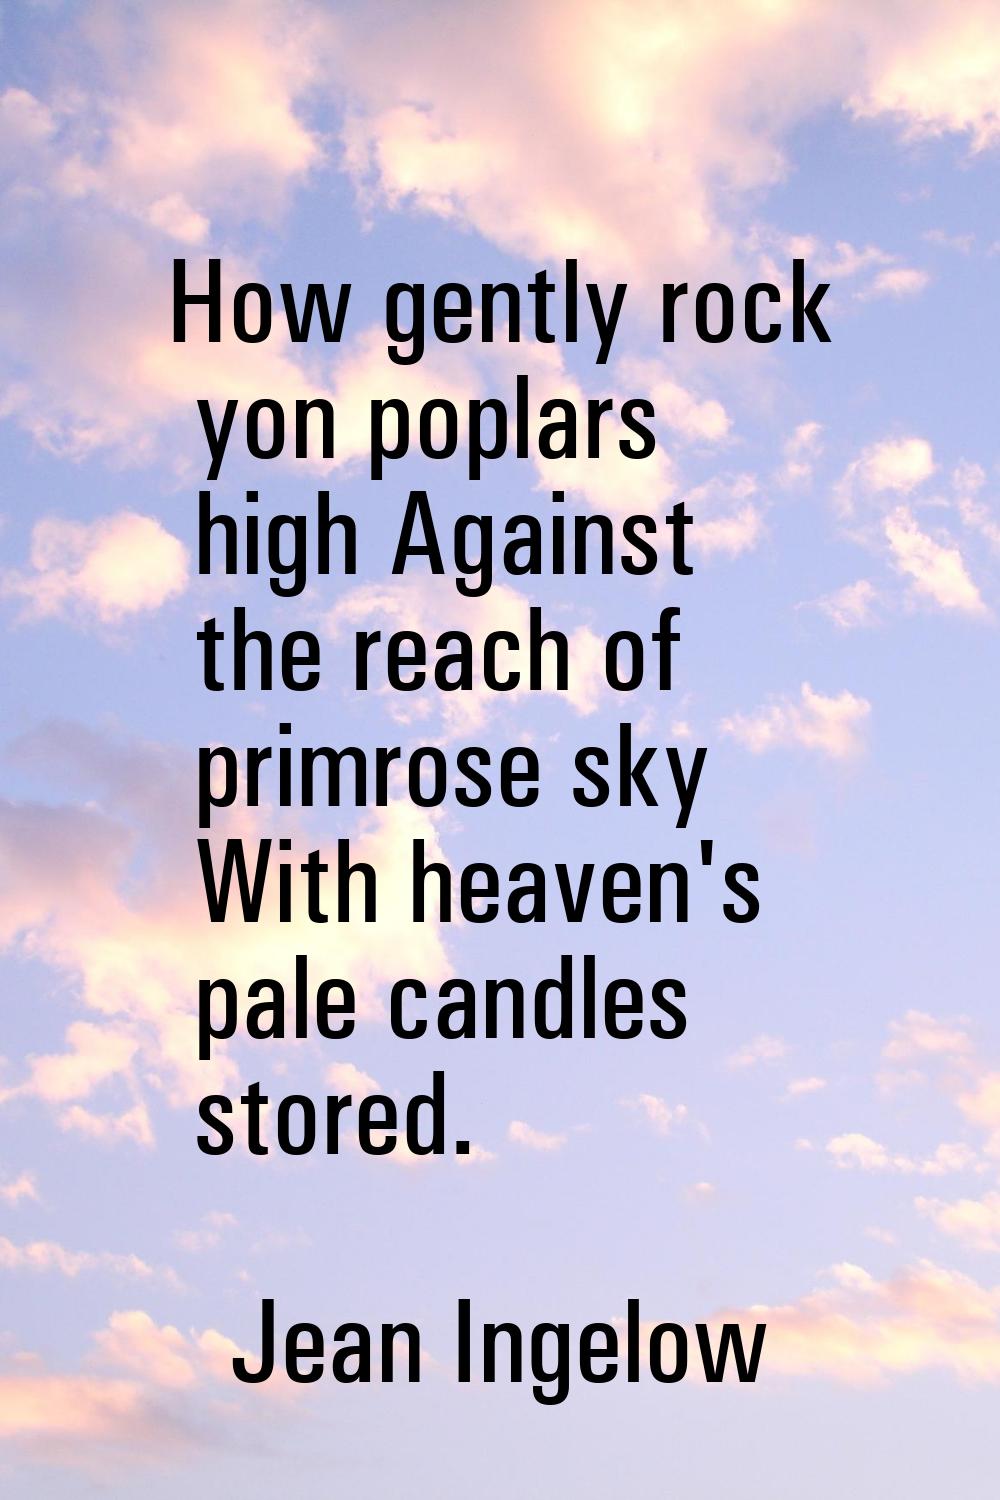 How gently rock yon poplars high Against the reach of primrose sky With heaven's pale candles store